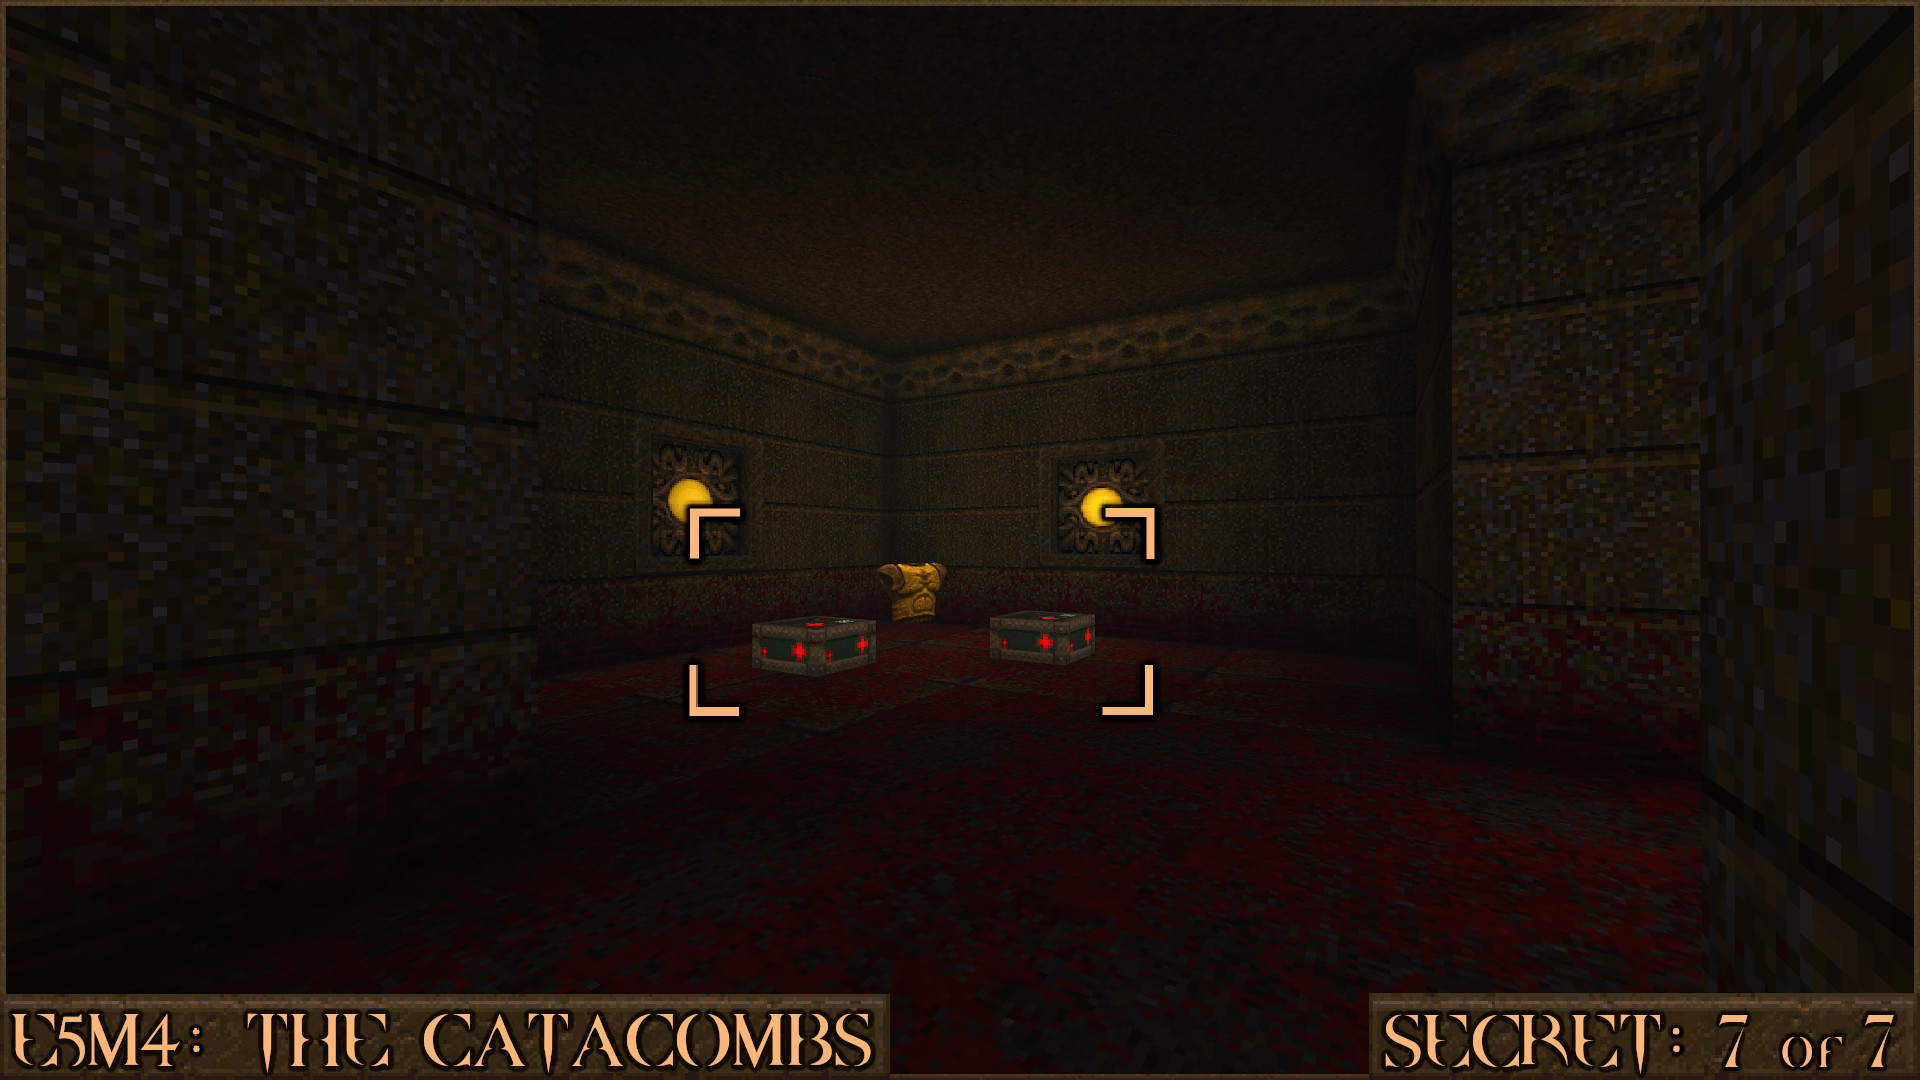 Quake Finding All Secrets in Quake Expansion pack: Dimension of the Past - E5M4: The Catacombs - 2BF530A